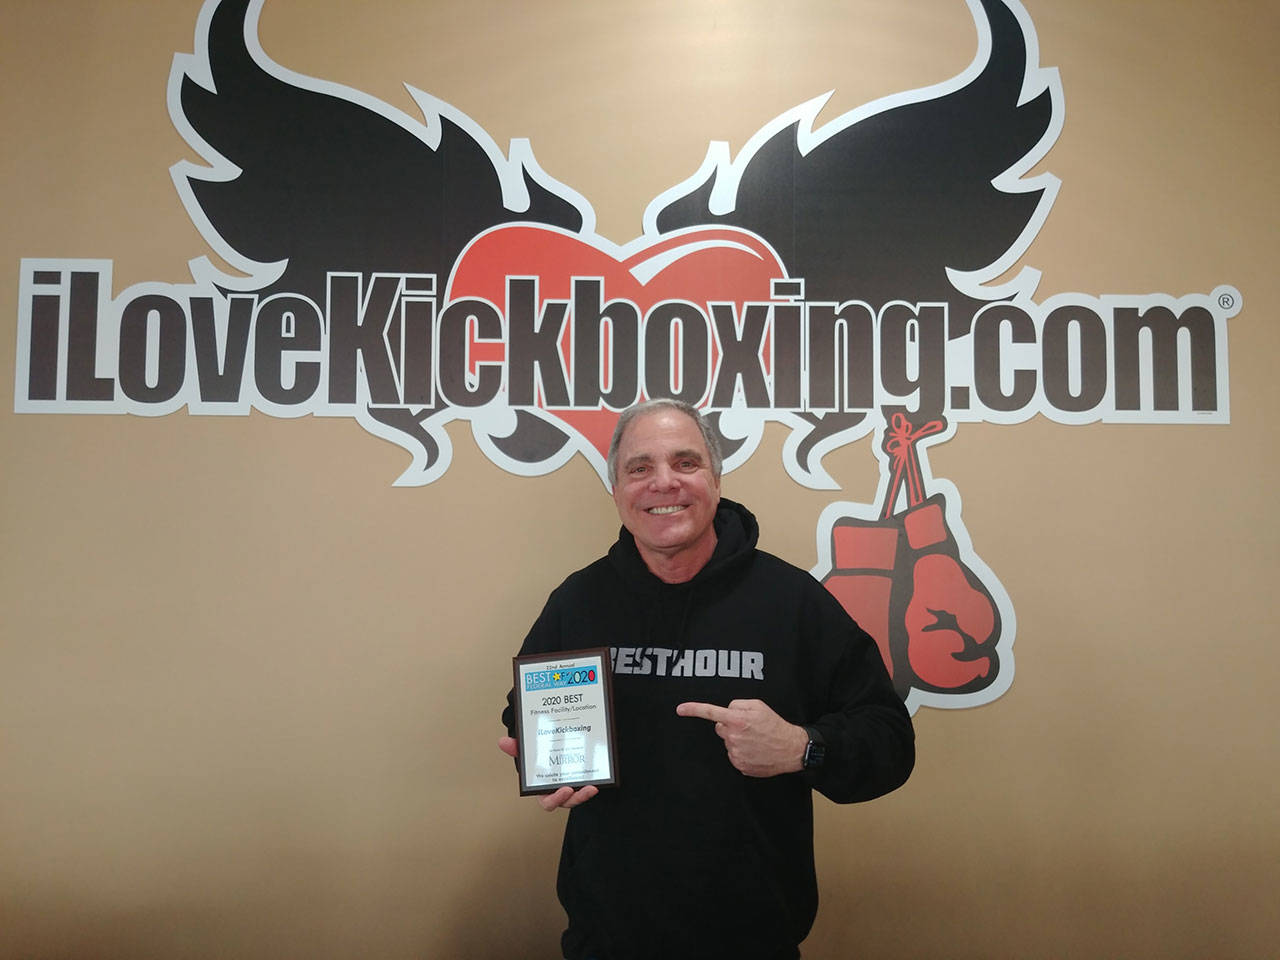 iLoveKickboxing won first place for Best Fitness Facility/Location in Federal Way. Cindy Ducich/staff photo